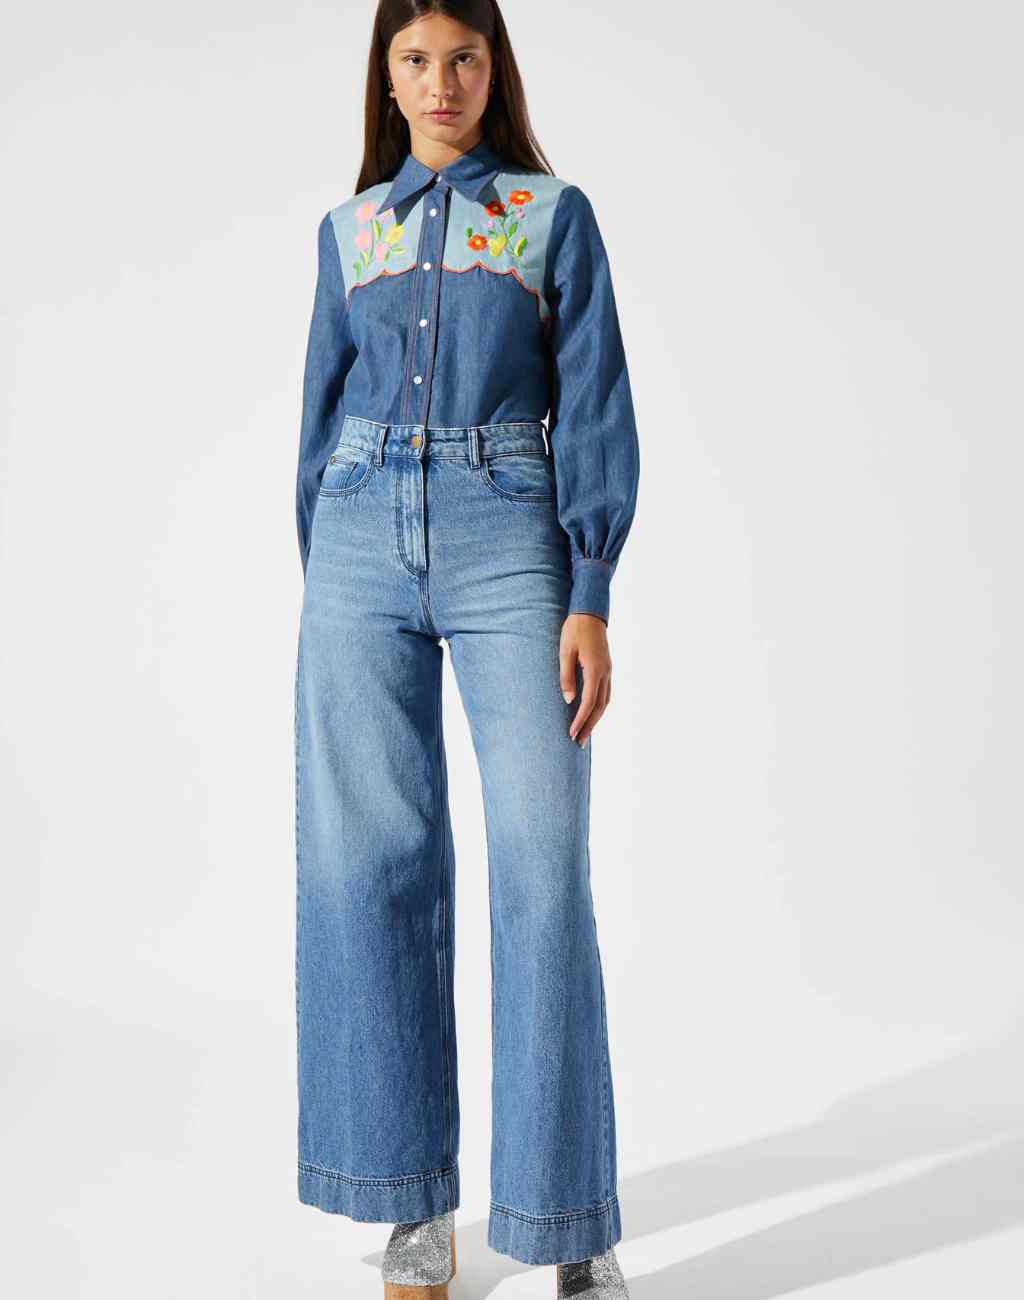 Chambray Shirt with Whimsical Embroidery - Visit Nifty Manoush 